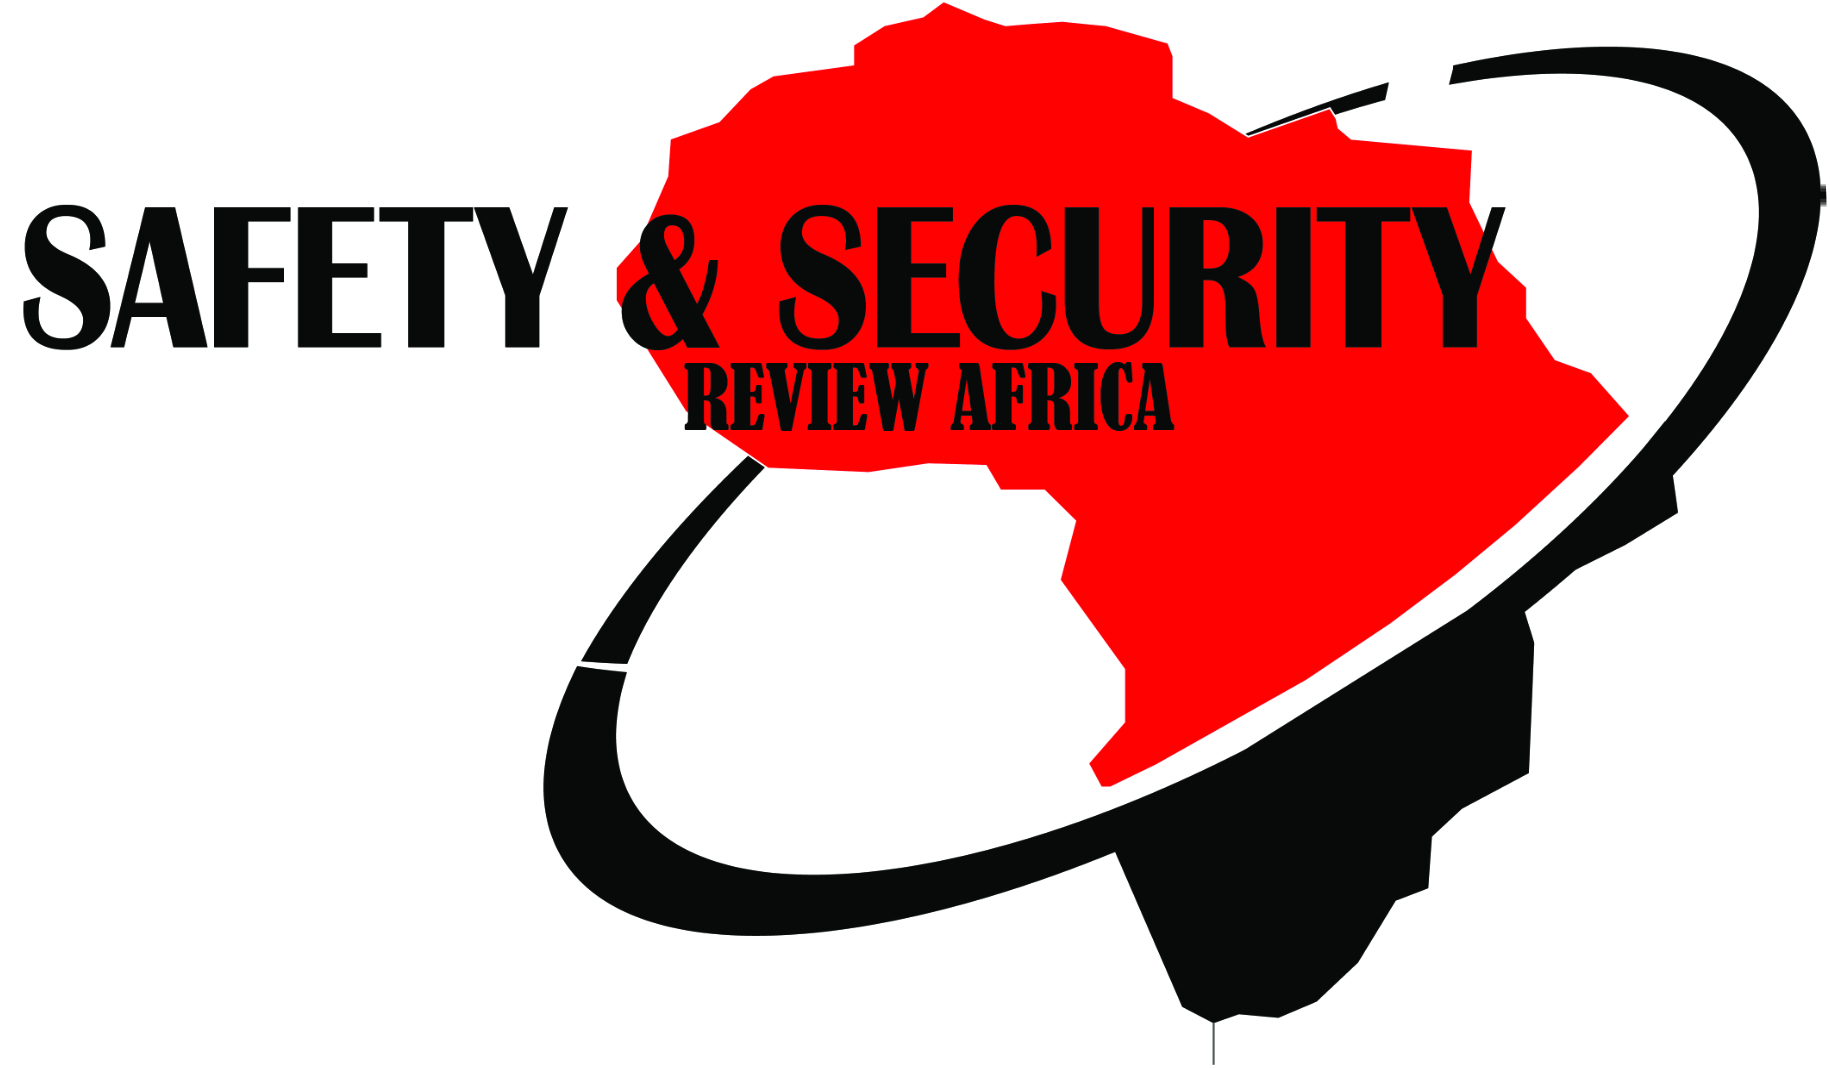 Safety & Security Review Africa